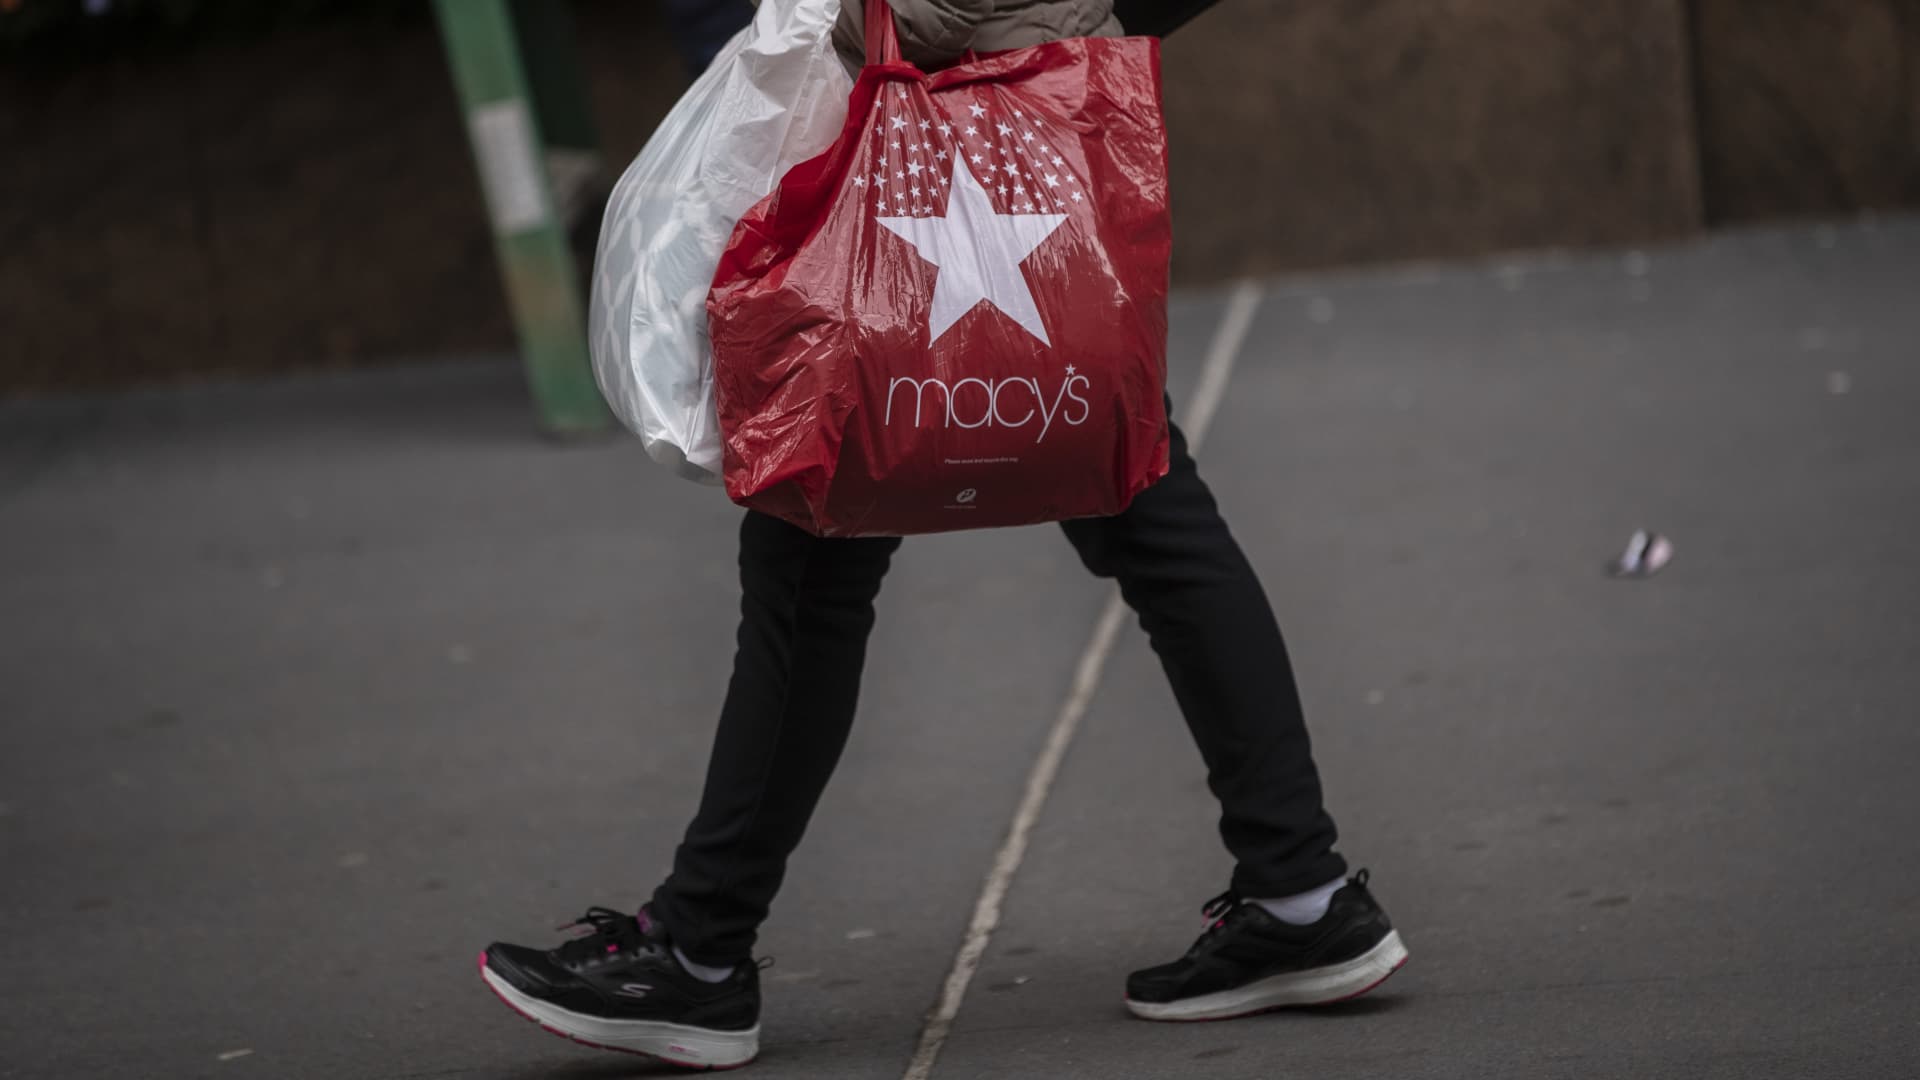 A pedestrian carries a Macy's Inc. branded shopping bag outside the company's flagship store in the Herald Square area of New York, U.S., on Tuesday, Nov. 17, 2020.